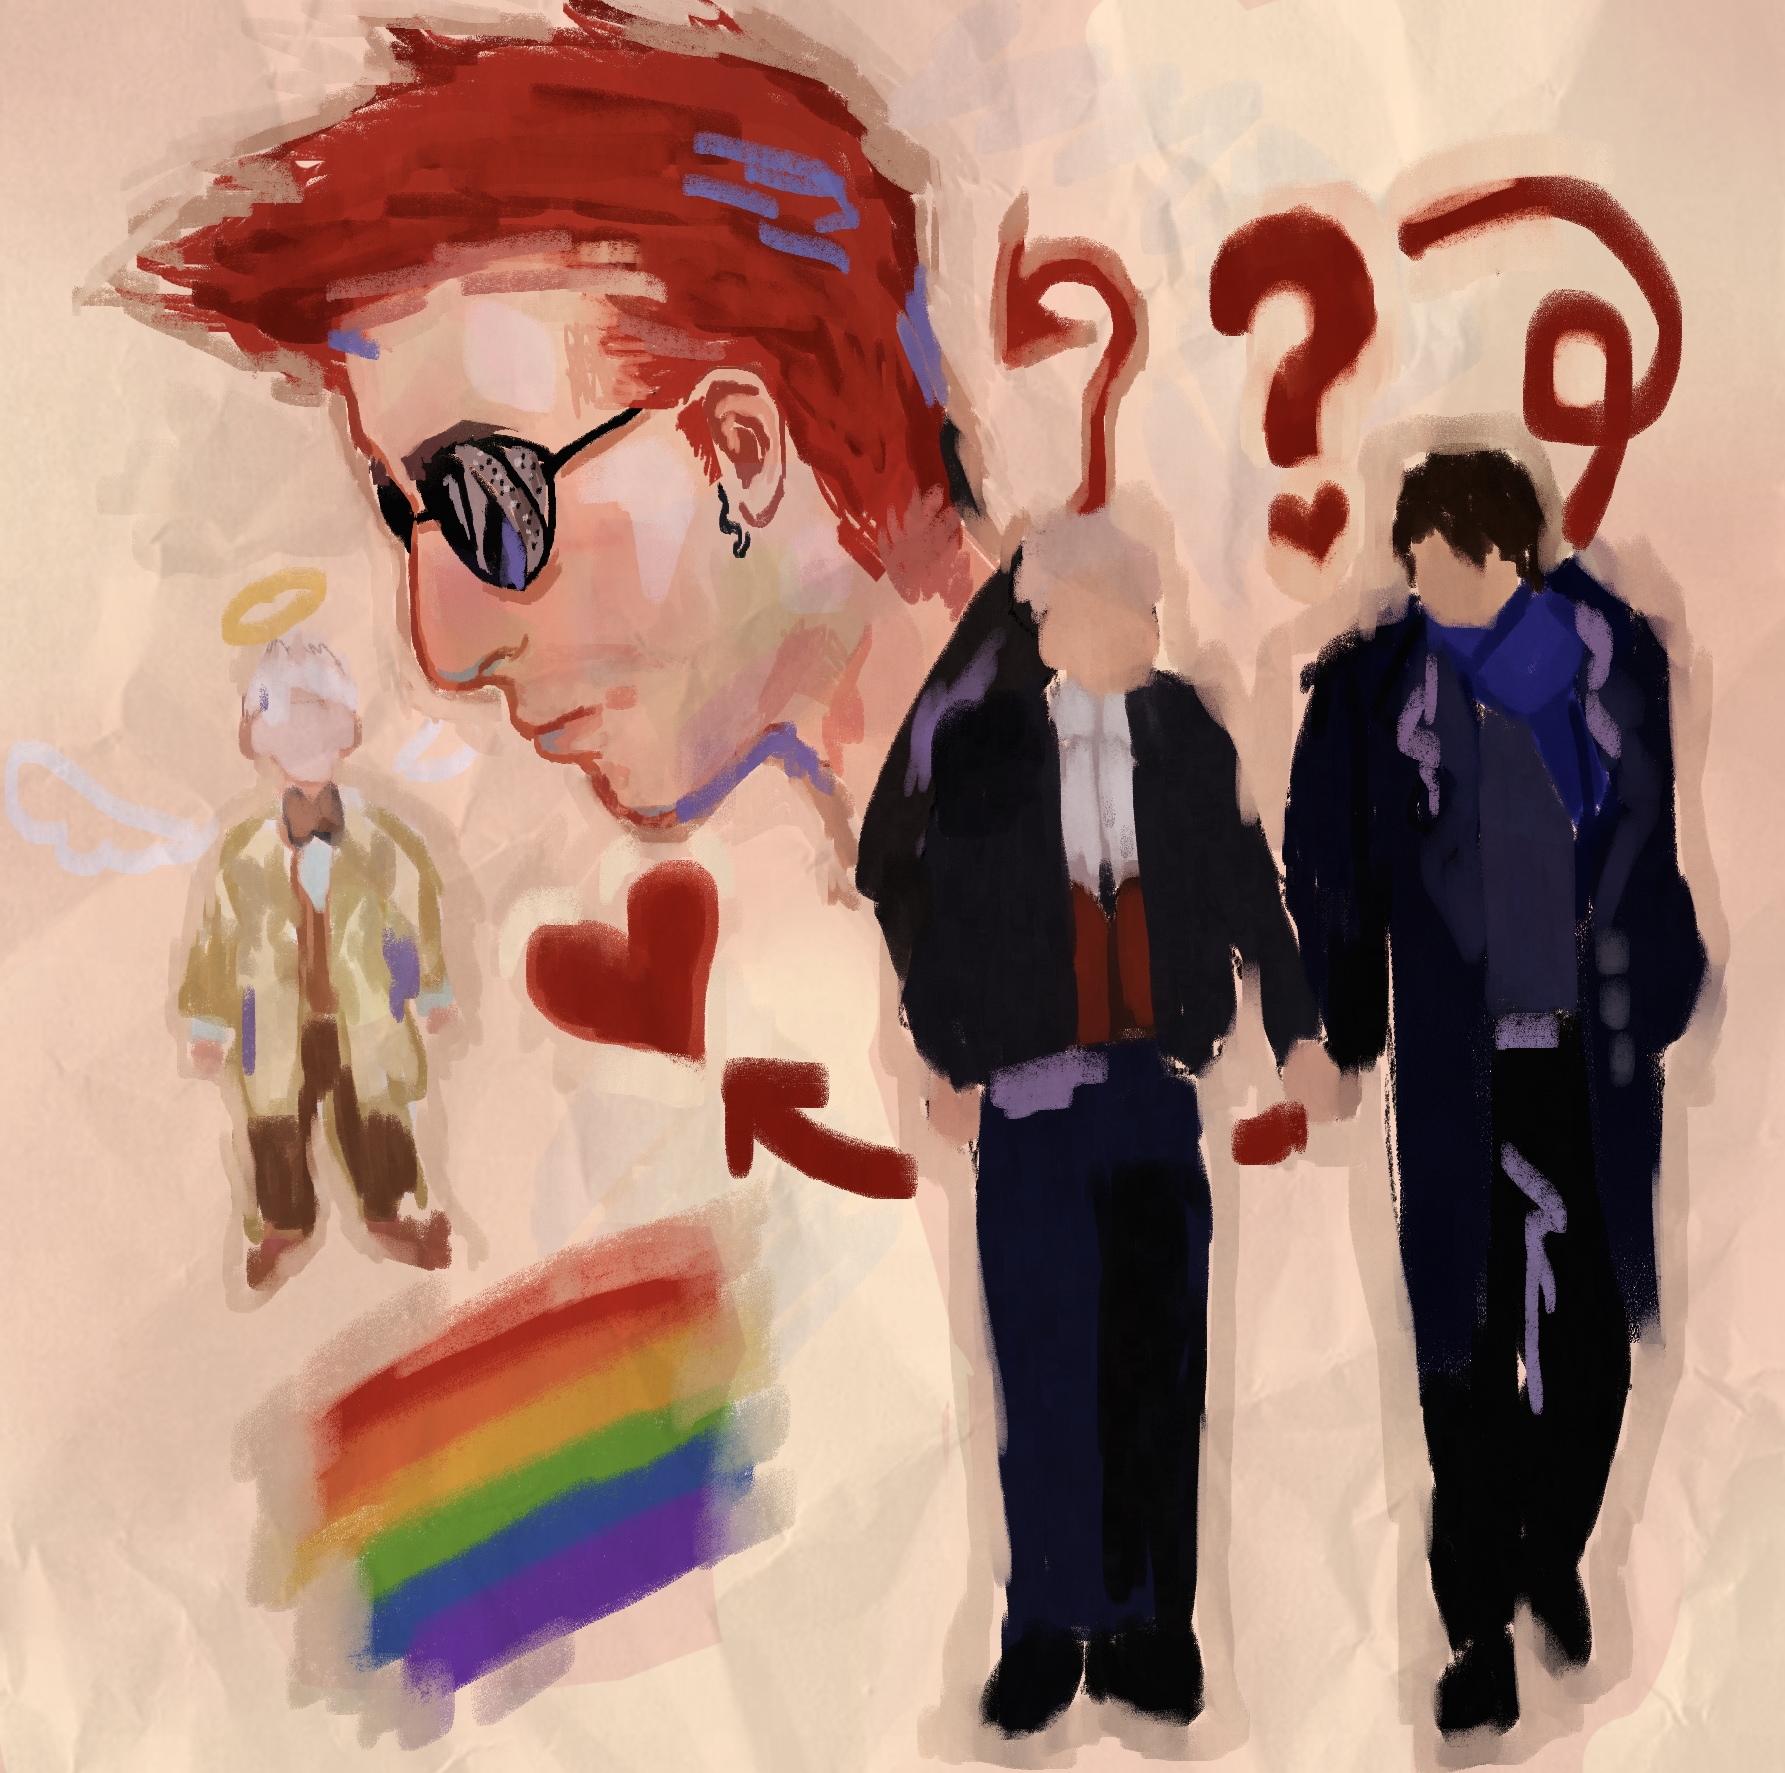 A digital illustration of a side profile of various characters. Crowley, a white masculine person with red hair and black round sunglasses, is in side profile in the top left corner. To his side, is a small Aziraphale, a white white-haired person with a haloe in a cream coat. Beneath him, is a rainbow flag. On the right side, there are two white masculine people. One has white hair, andone has dark hair. Various question marks and hearts surround them.